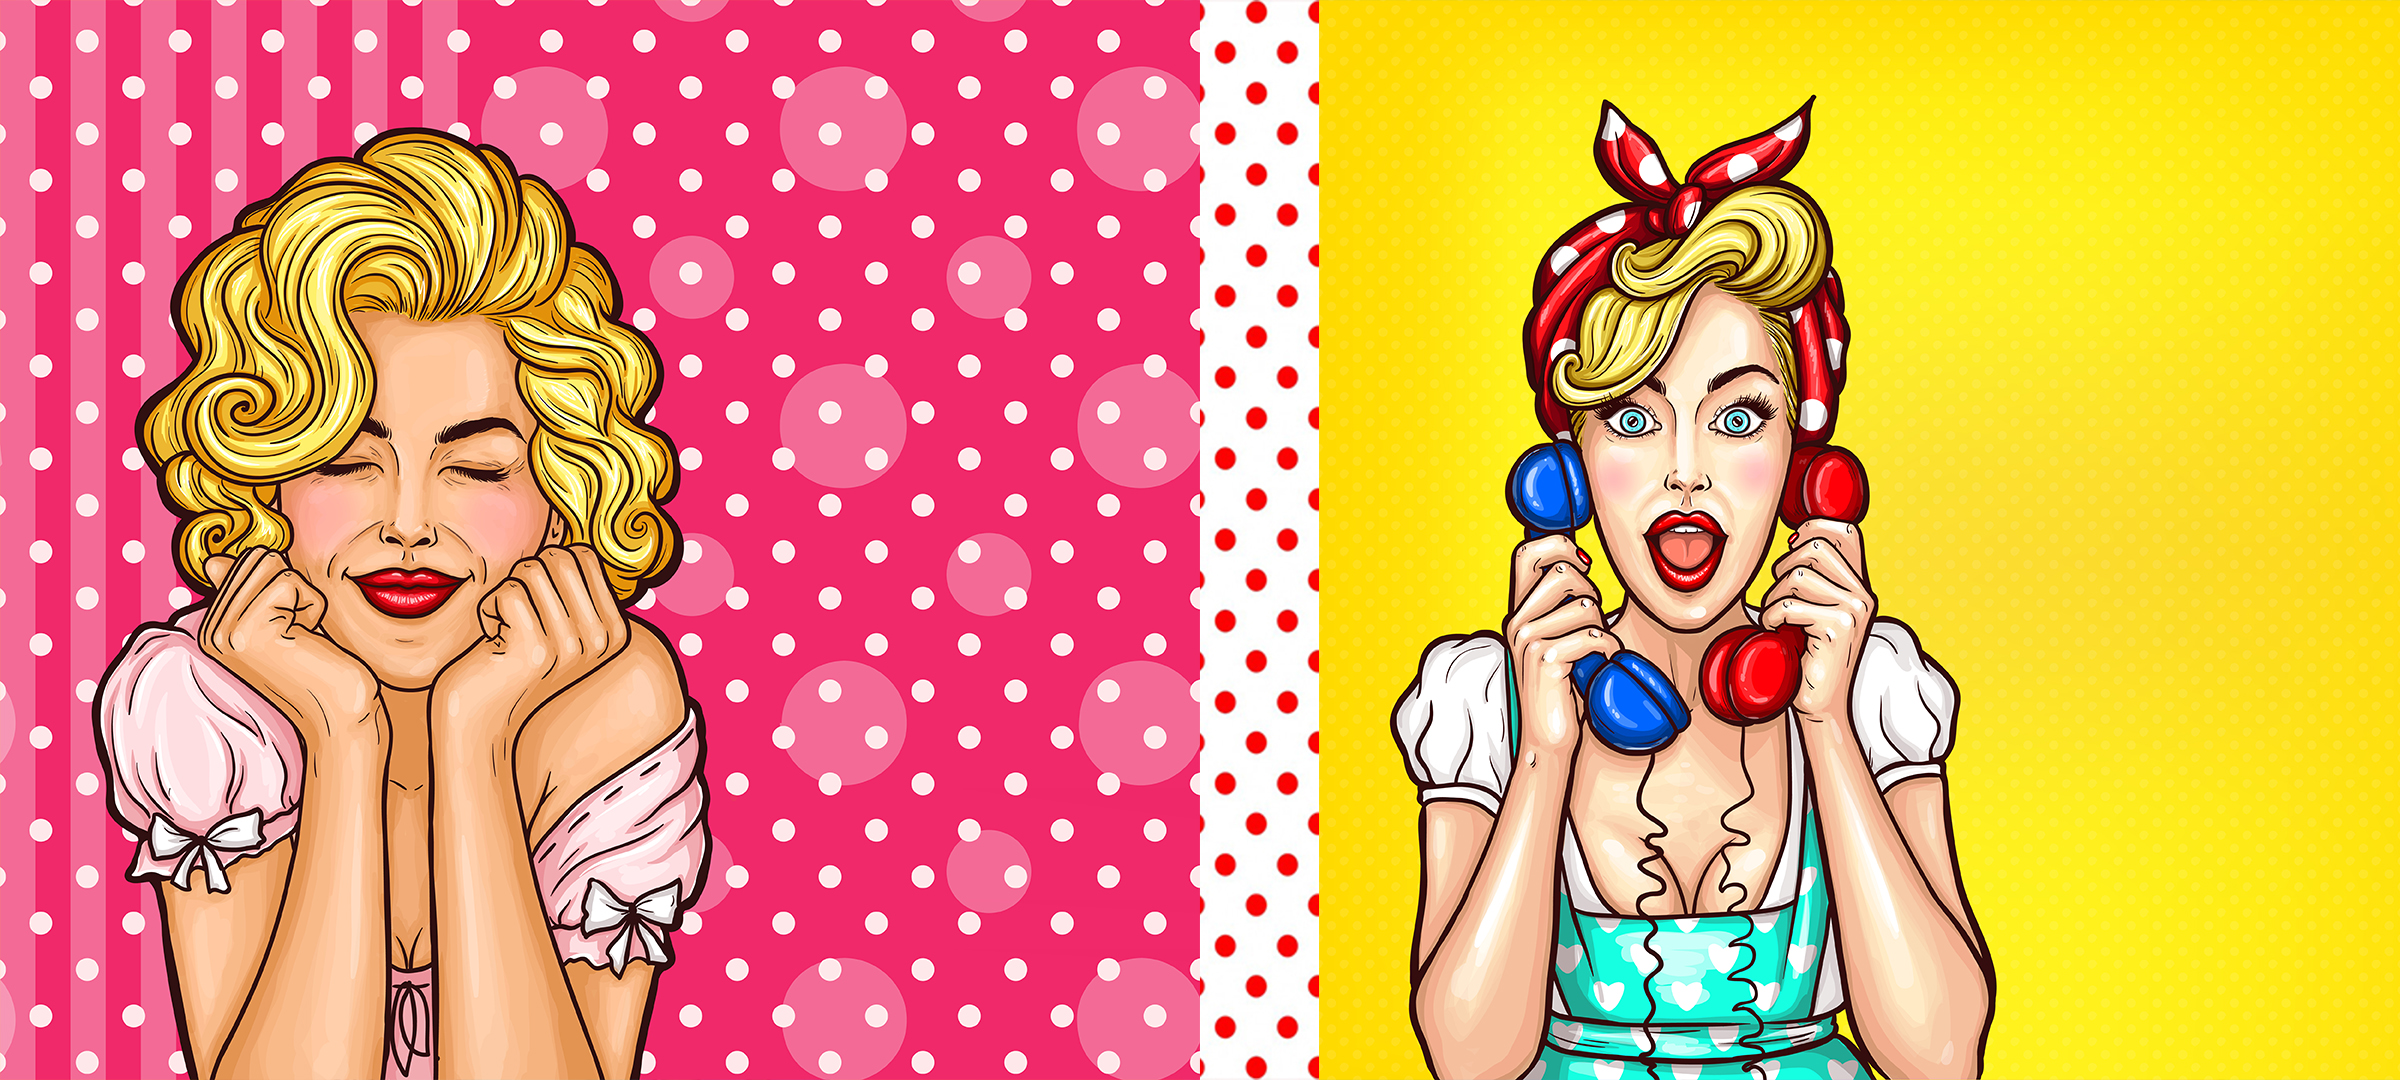 Marilyn on pink polka dot background and woman with kerchief holding a blue phone and a red phone